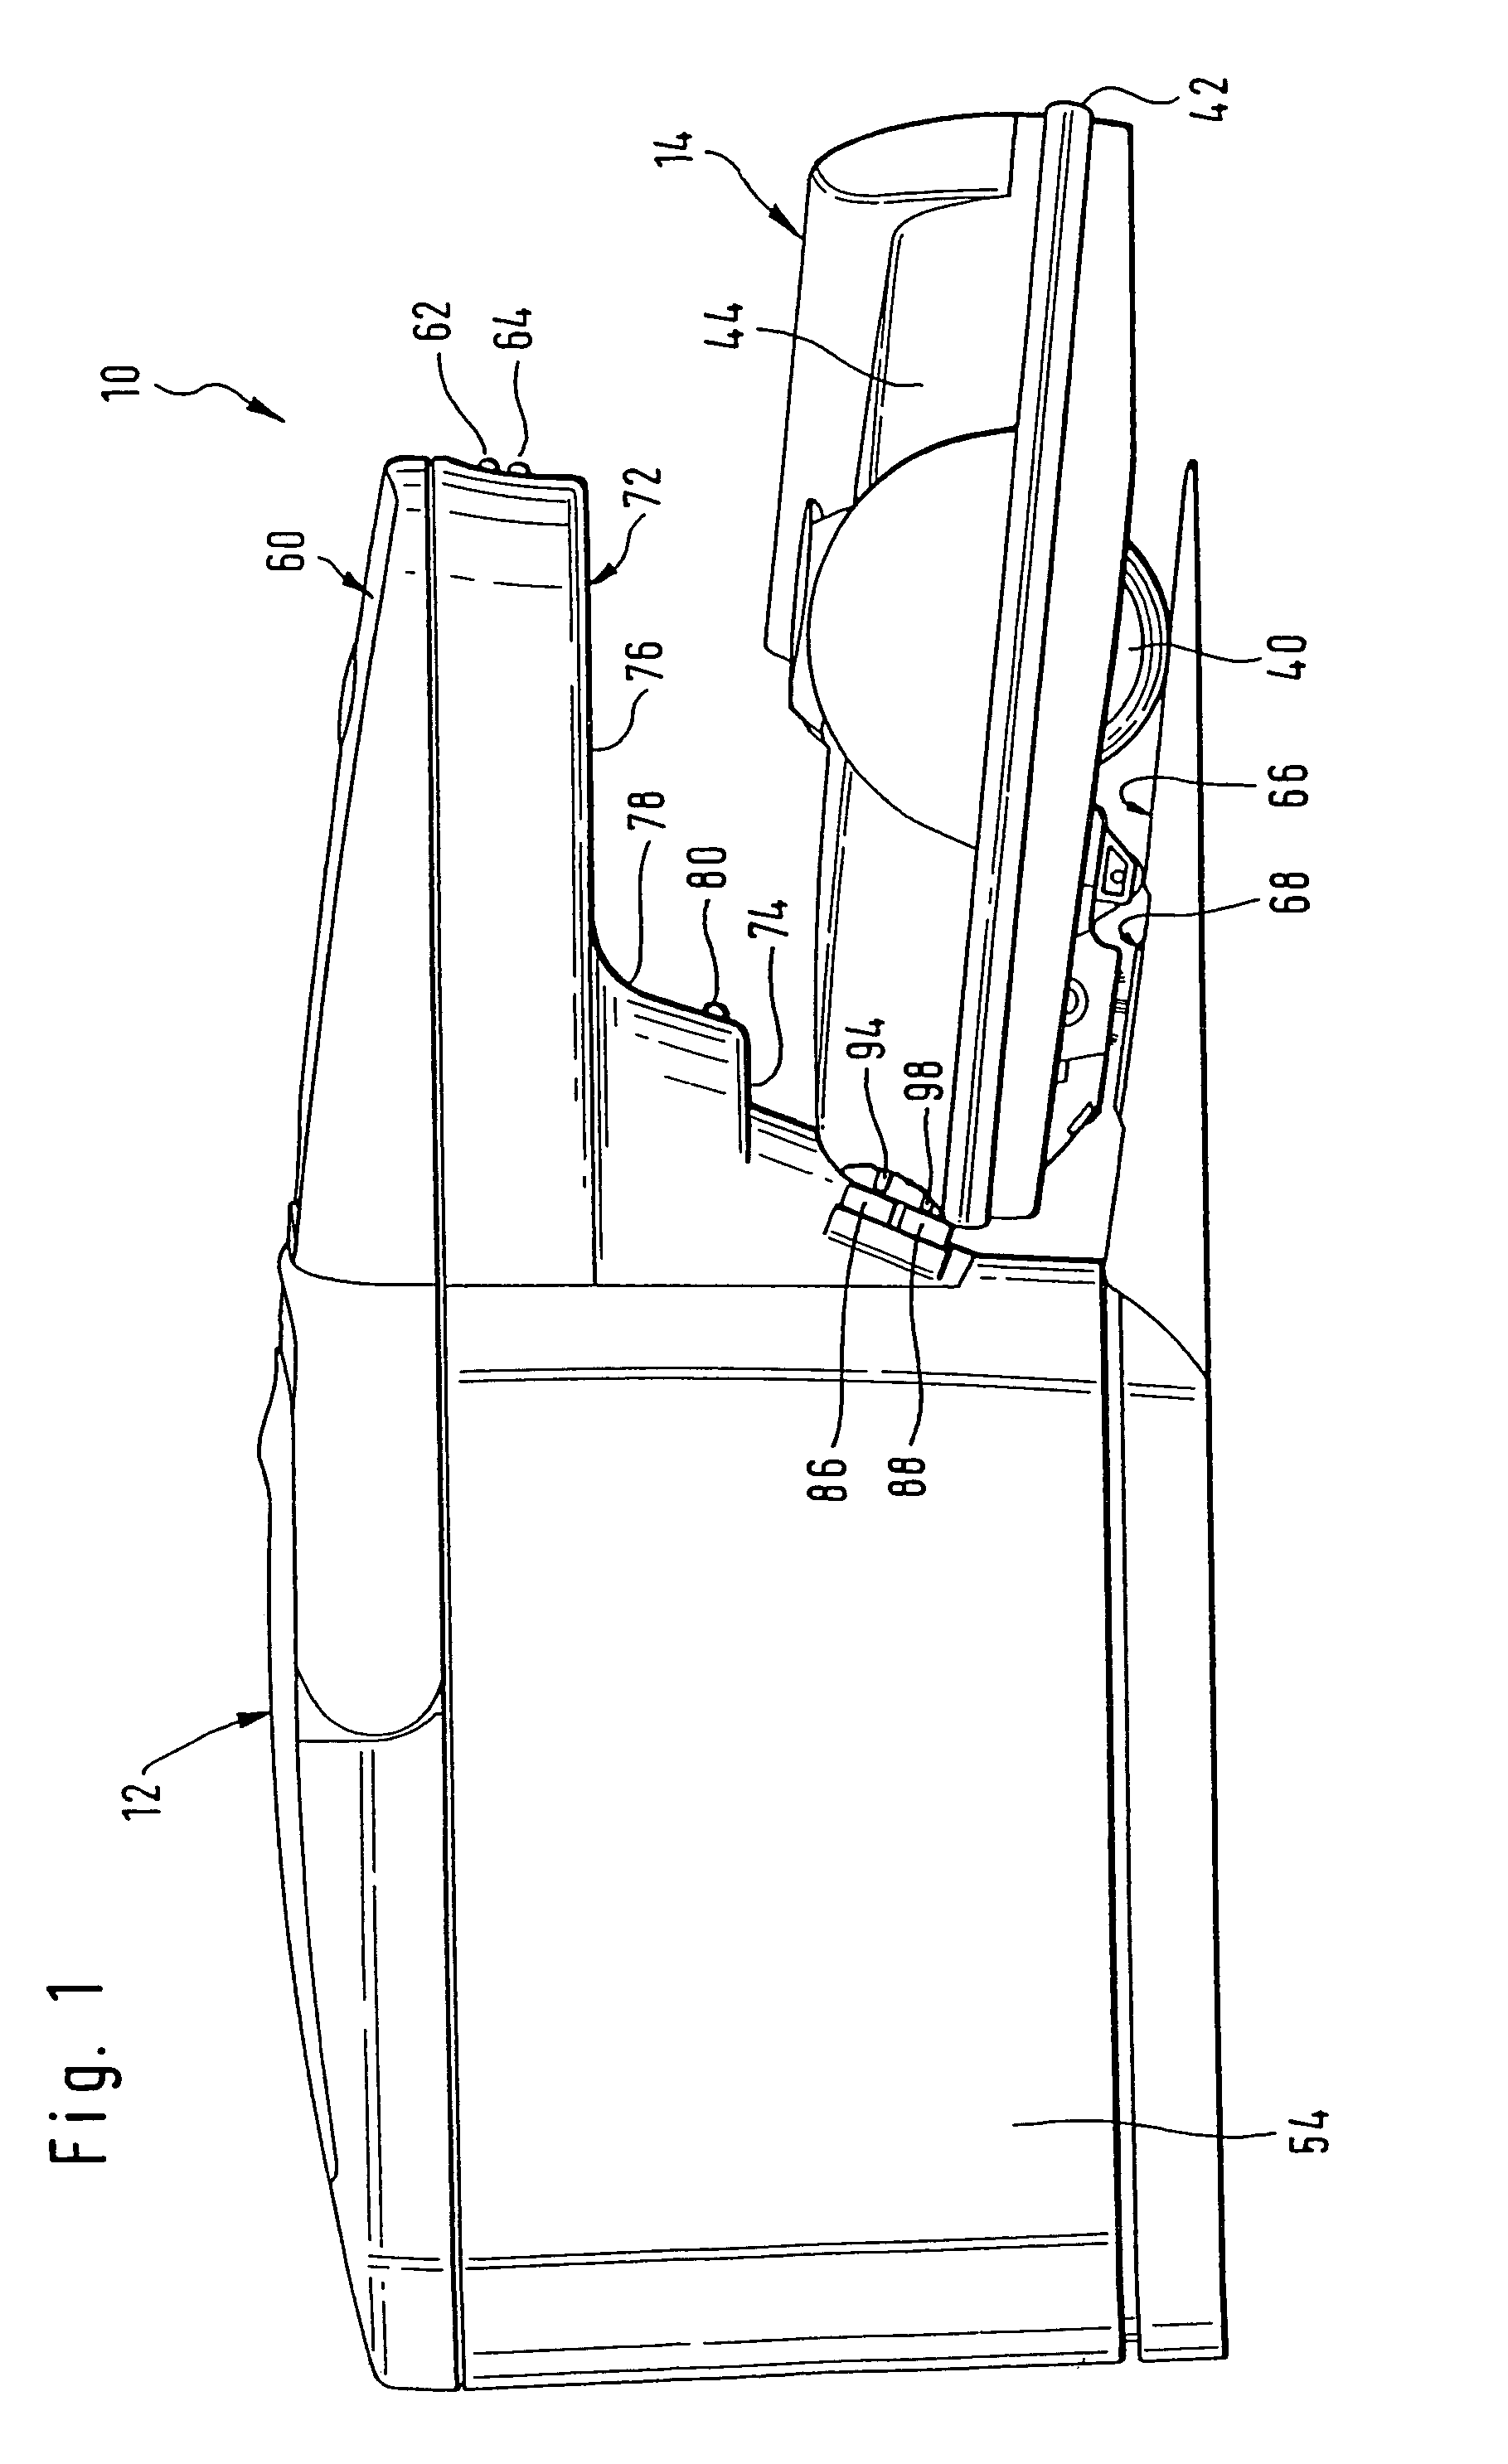 Floor treatment system with self-propelled and self-steering floor treatment unit